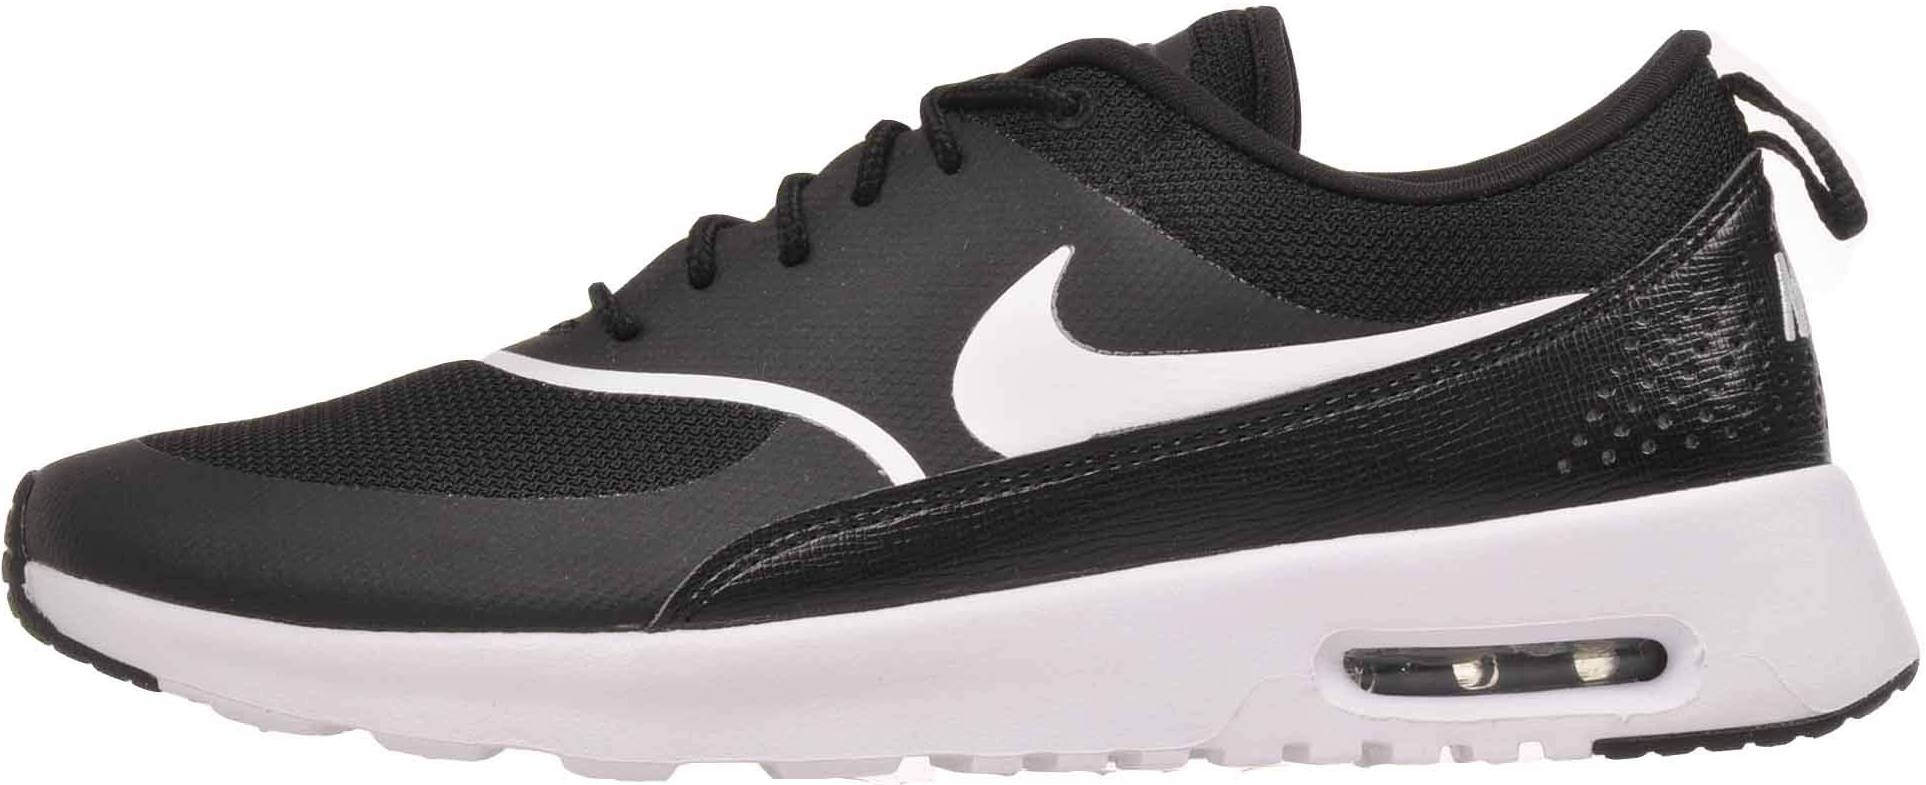 Only $49 + Review of Nike Air Max Thea 